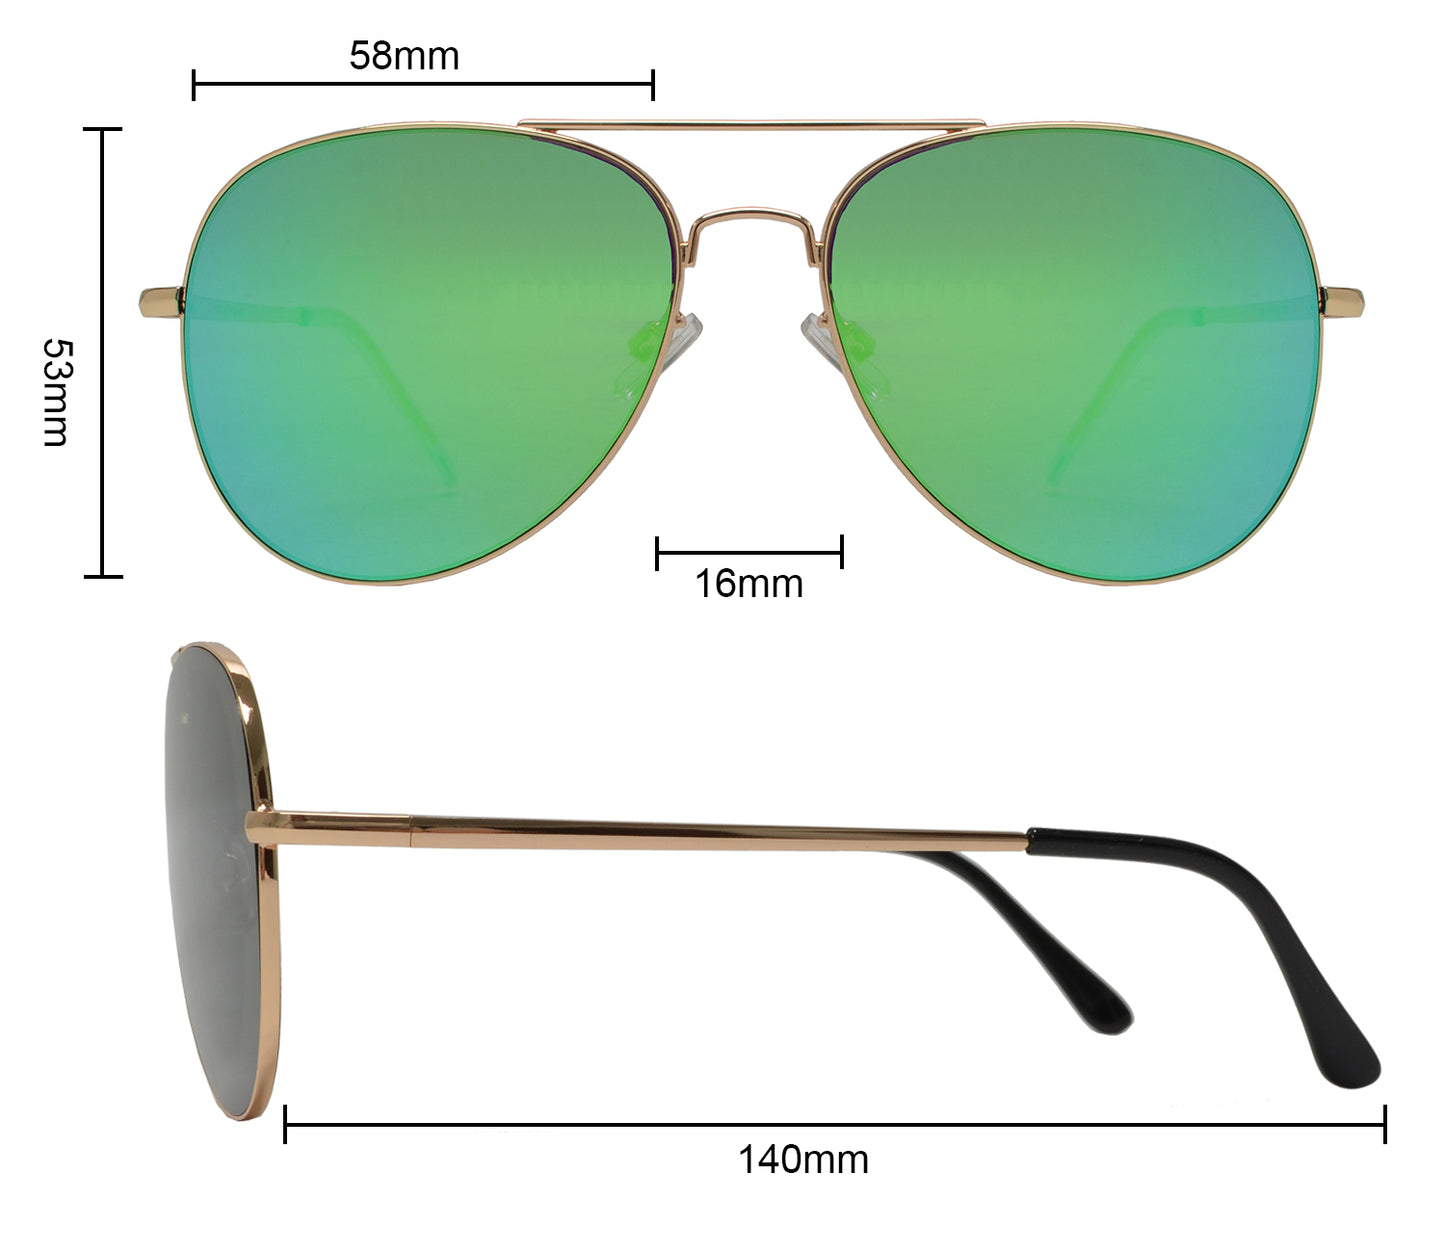 FC 6516 Green RV - Oval Shaped Thin Stainless Frame Sunglasses with Green Mirror Lens